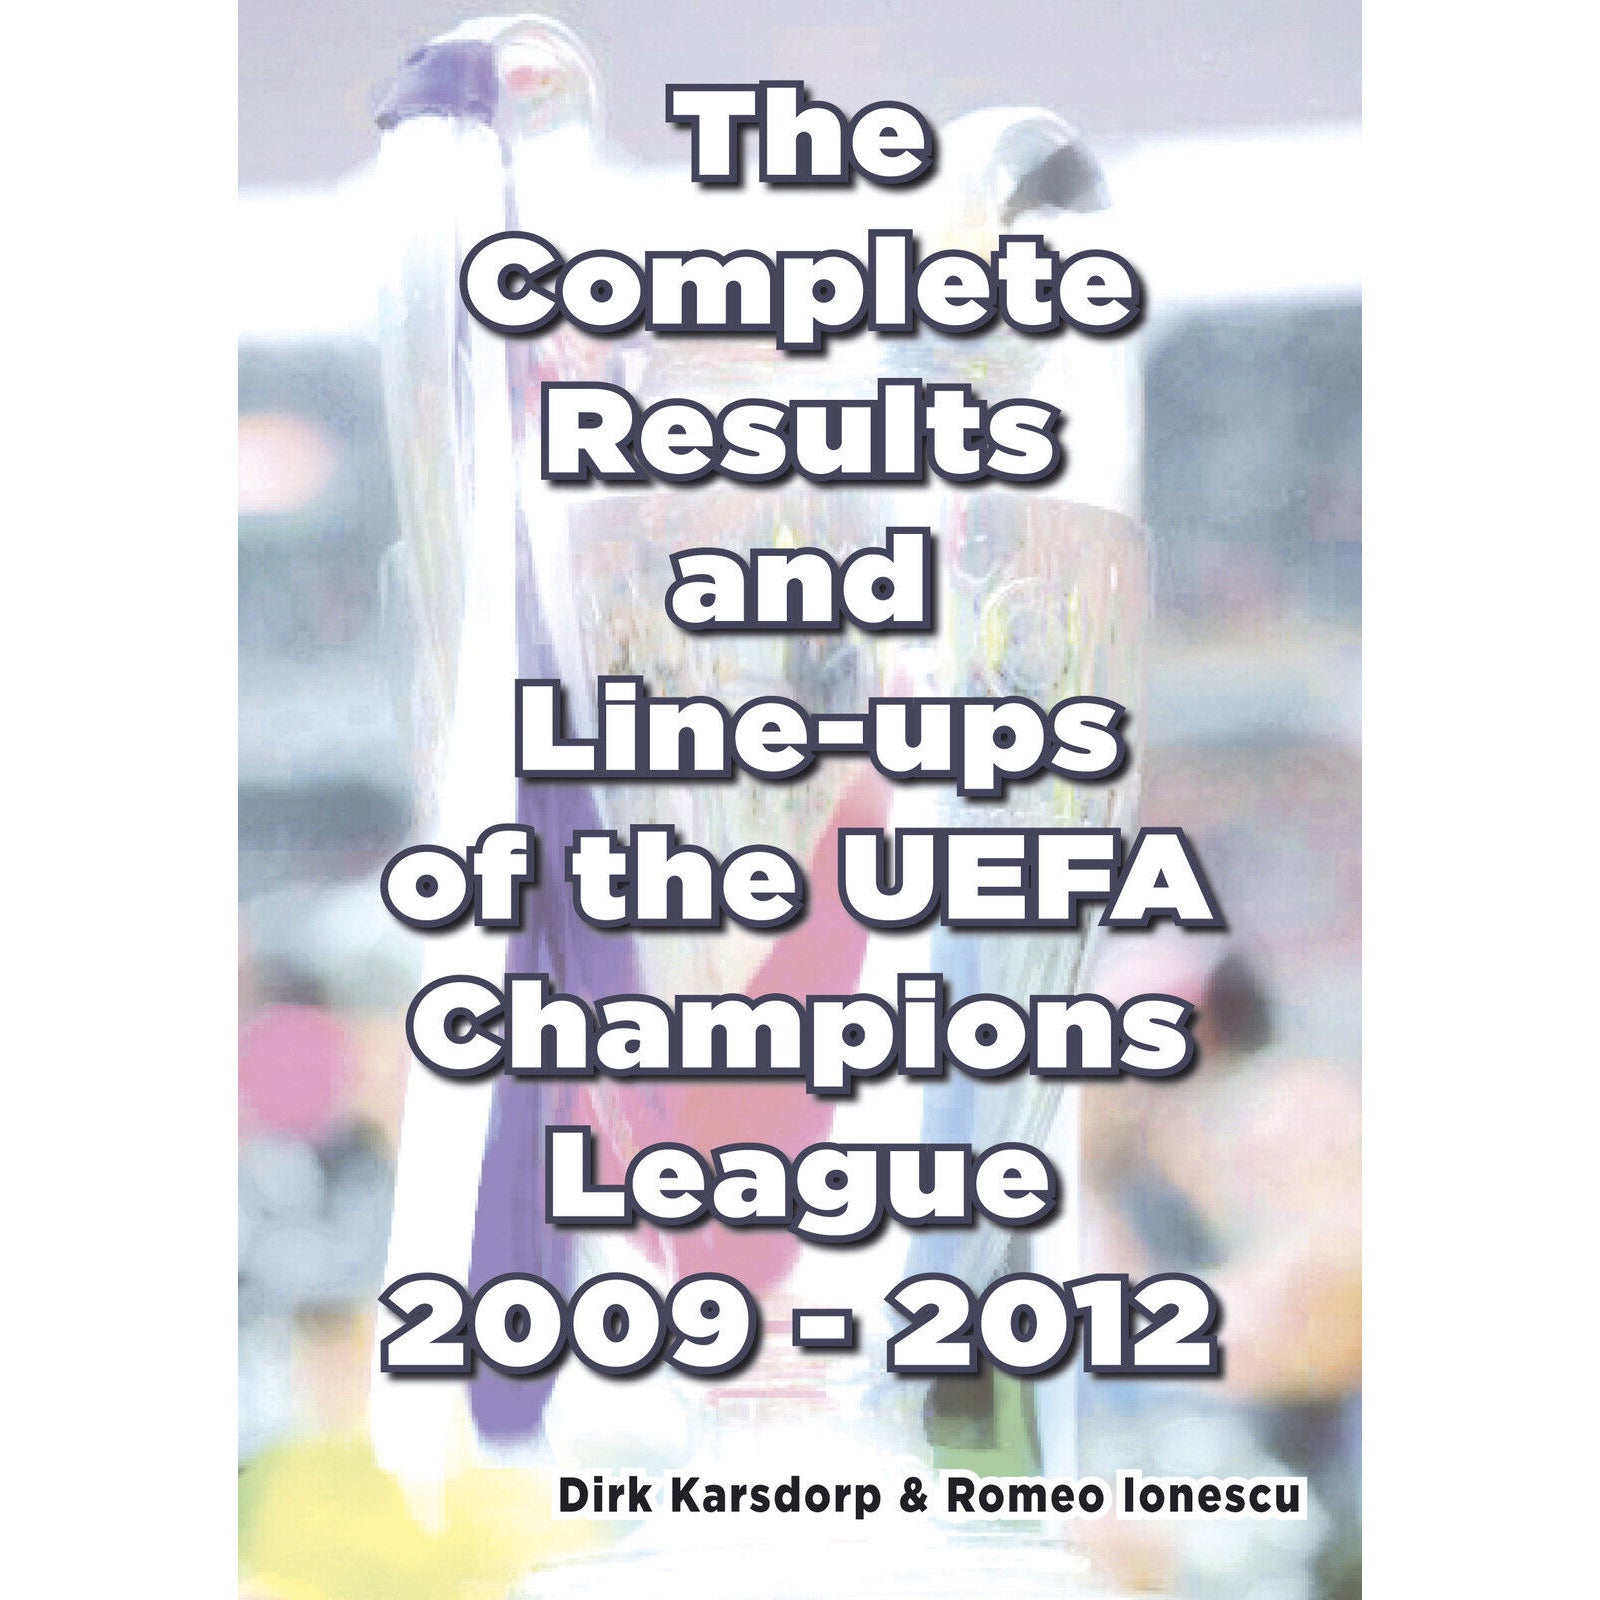 The Complete Results & Line-ups of the UEFA Champions League 2009-2012